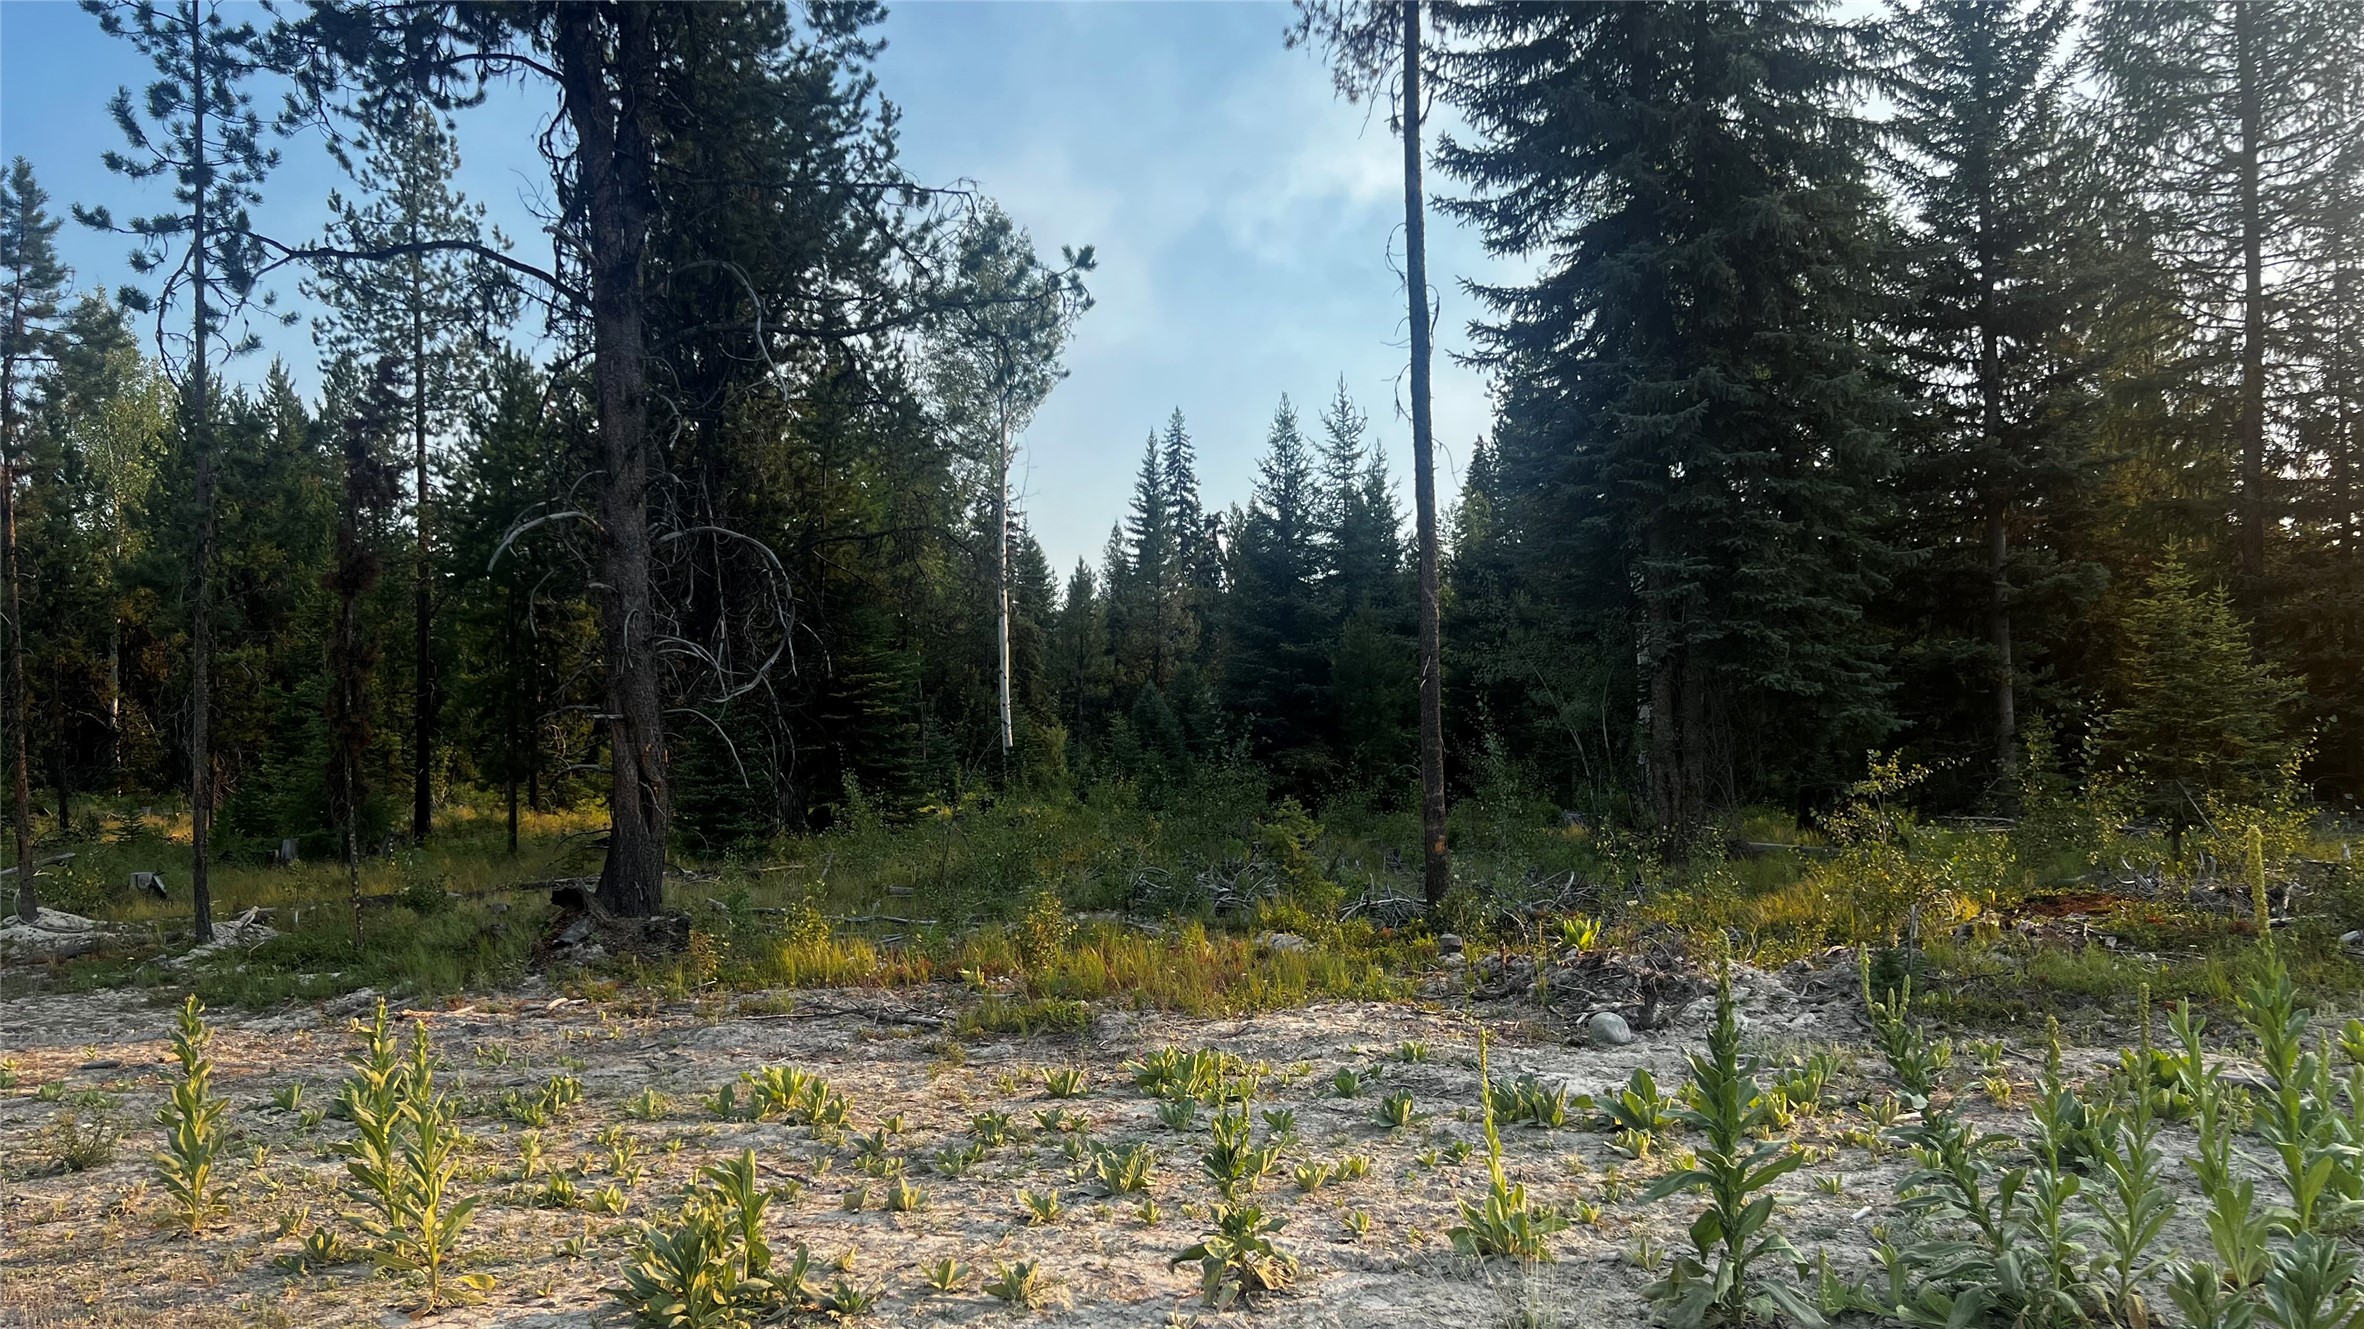 This 20.65 acre lot is located within close proximity to Happy's Inn and halfway between Libby and Kalispell MT. Whether your building your dream home or starting a small homestead this property will meet your needs and has endless potential. Within a short proximity are the Thompson Chain of lakes, lakes, streams and rivers. The year long recreational opportunities in the area are countless. Phone and power are installed. Take a drive and visit your future homesite. Call Roby Bowe at 406-293-1988 or your Real Estate Professional.